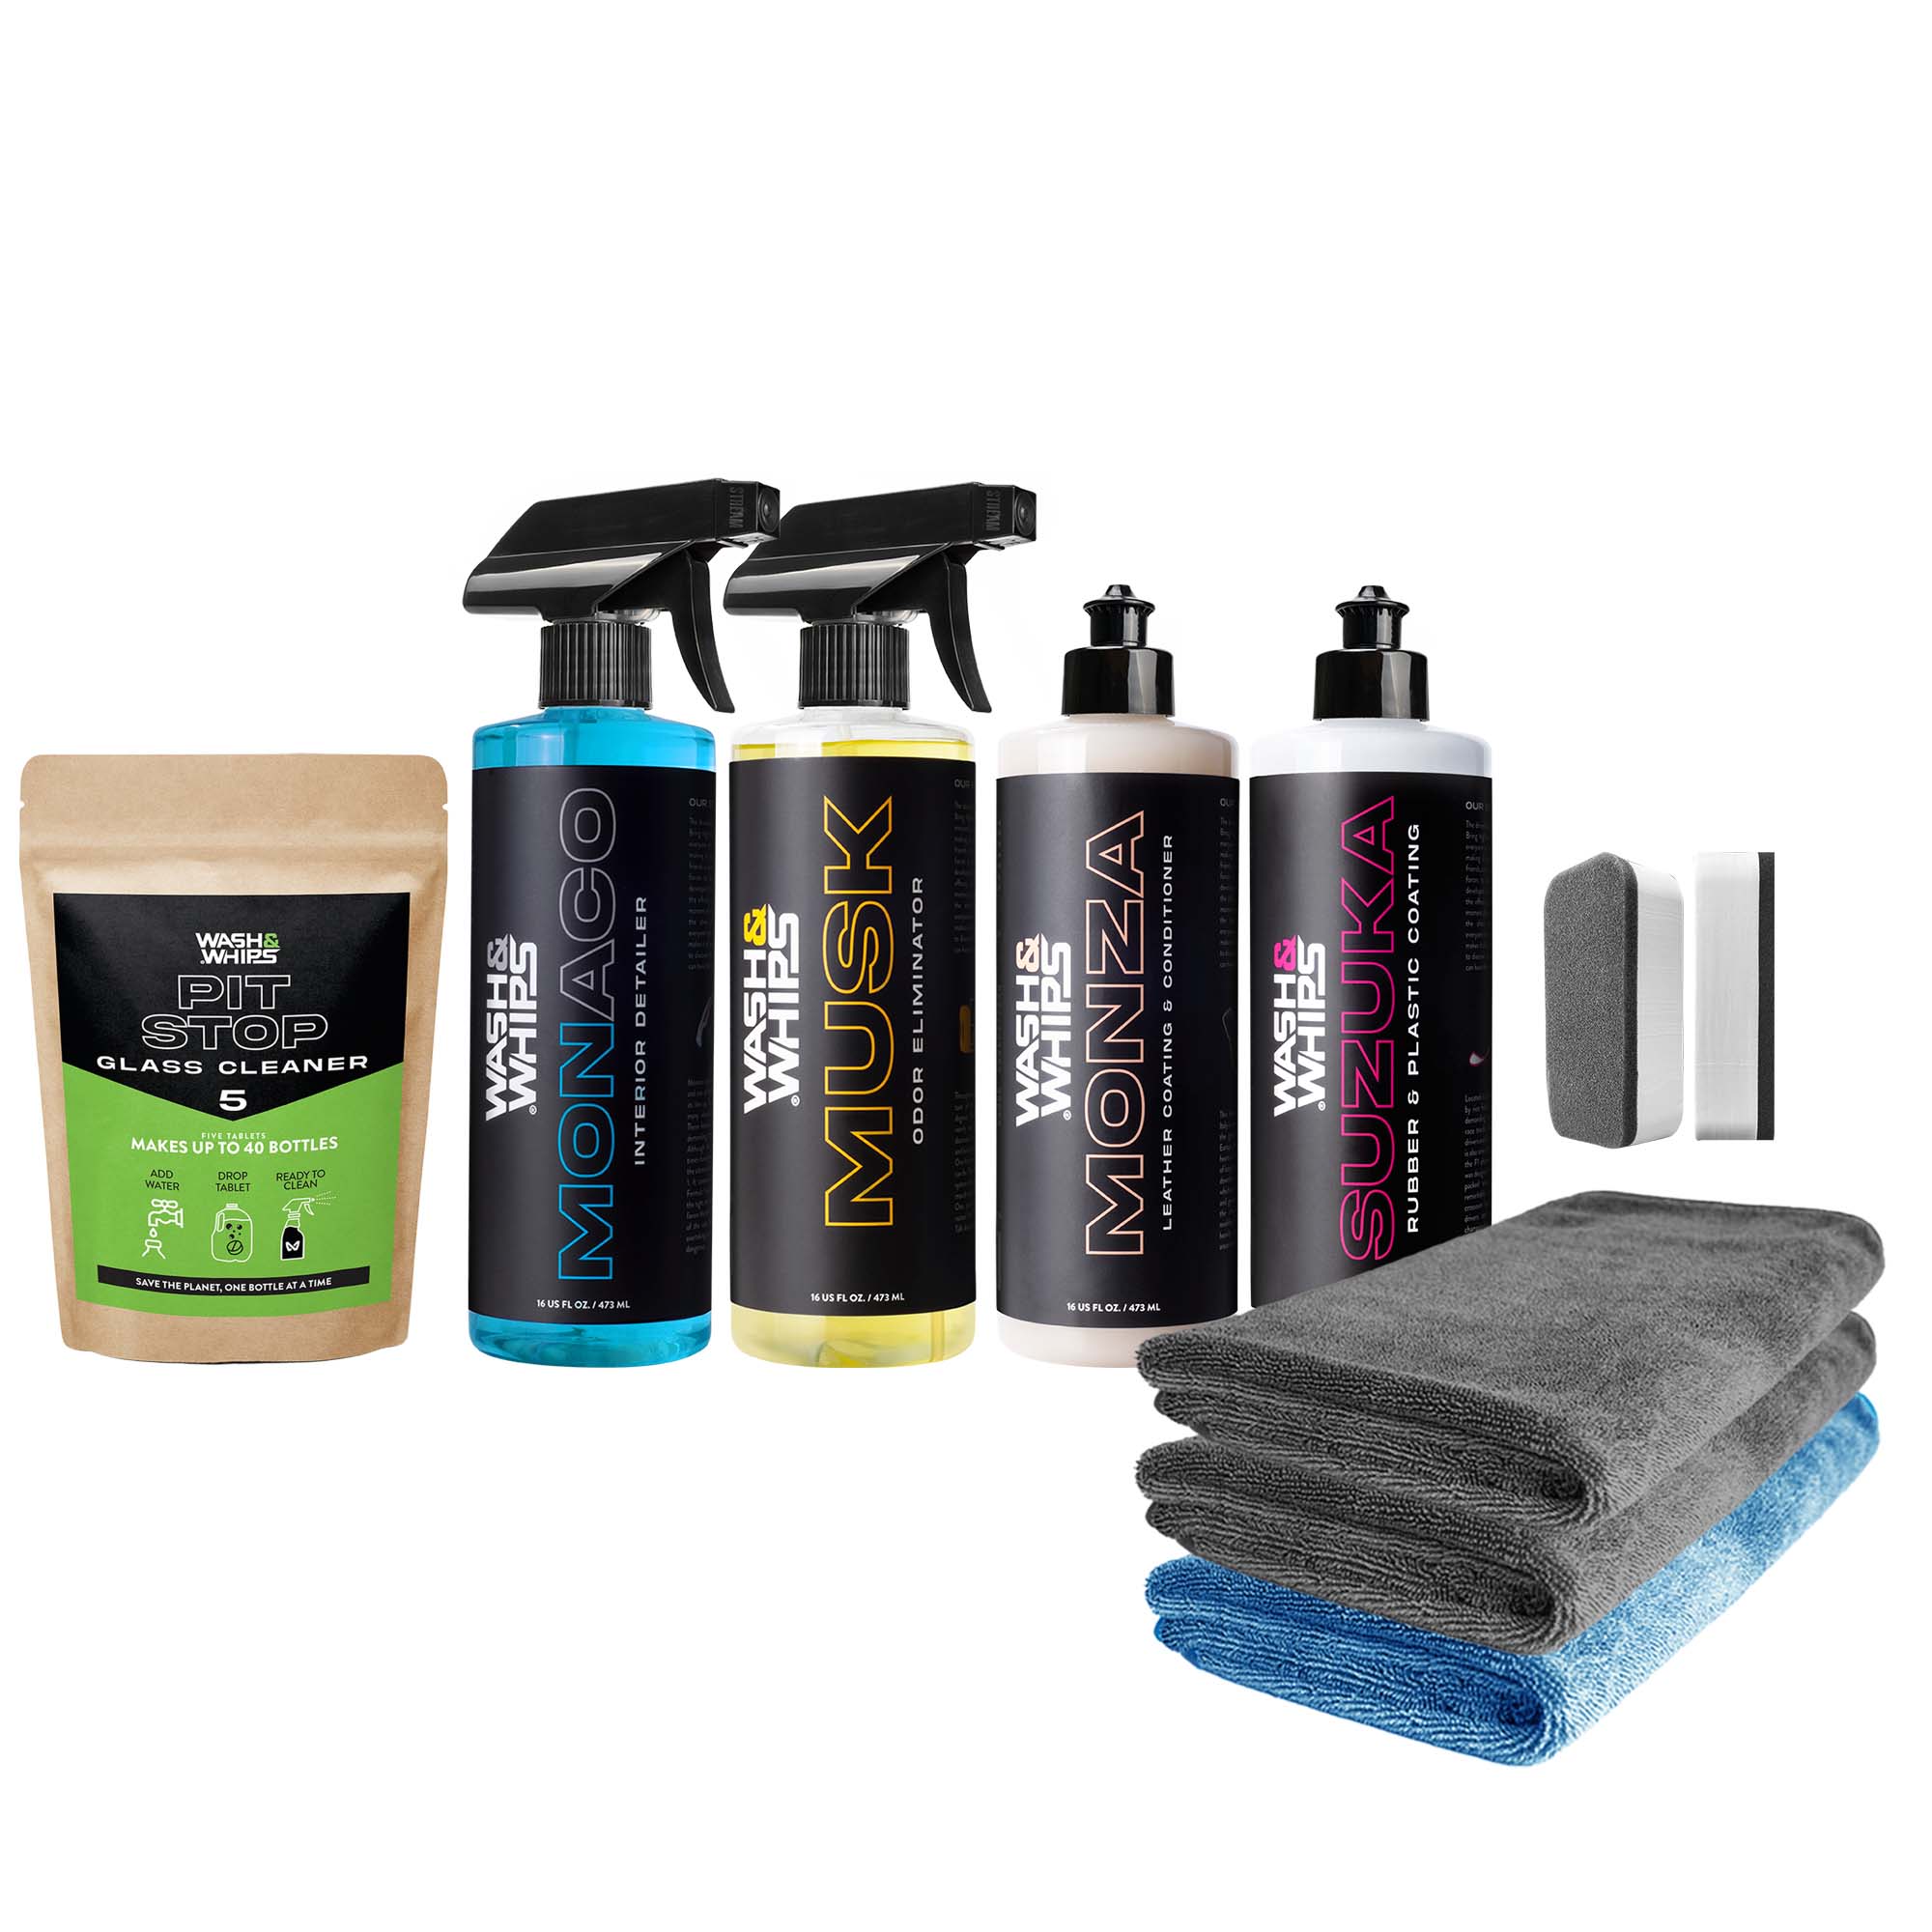 Interior Kit: Complete Interior Kit for Effective Car Care